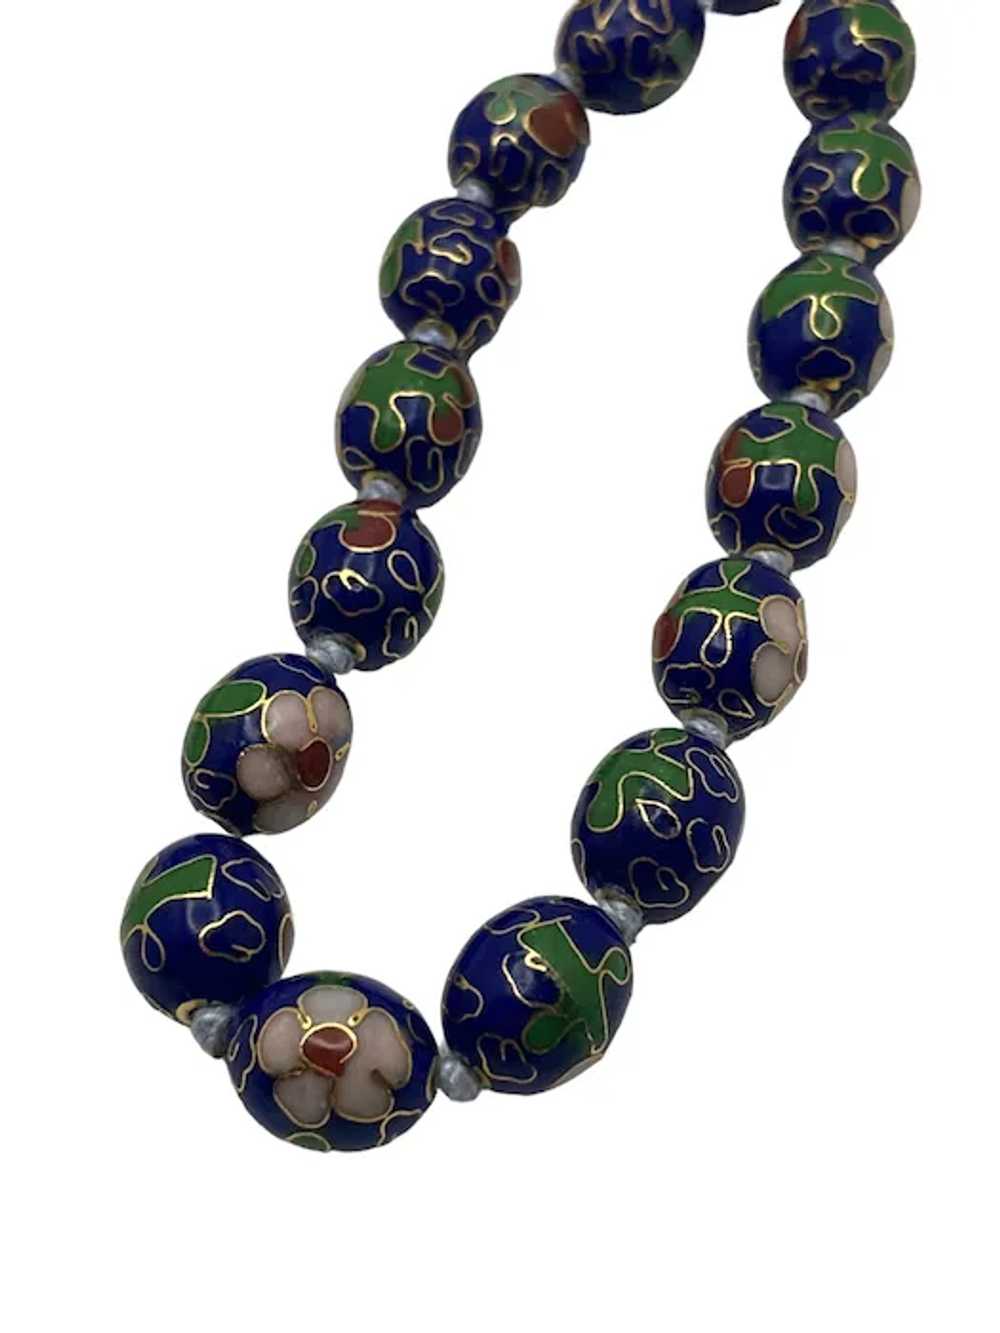 Vintage Chinese Cloisonne Oval Bead Necklace - image 6